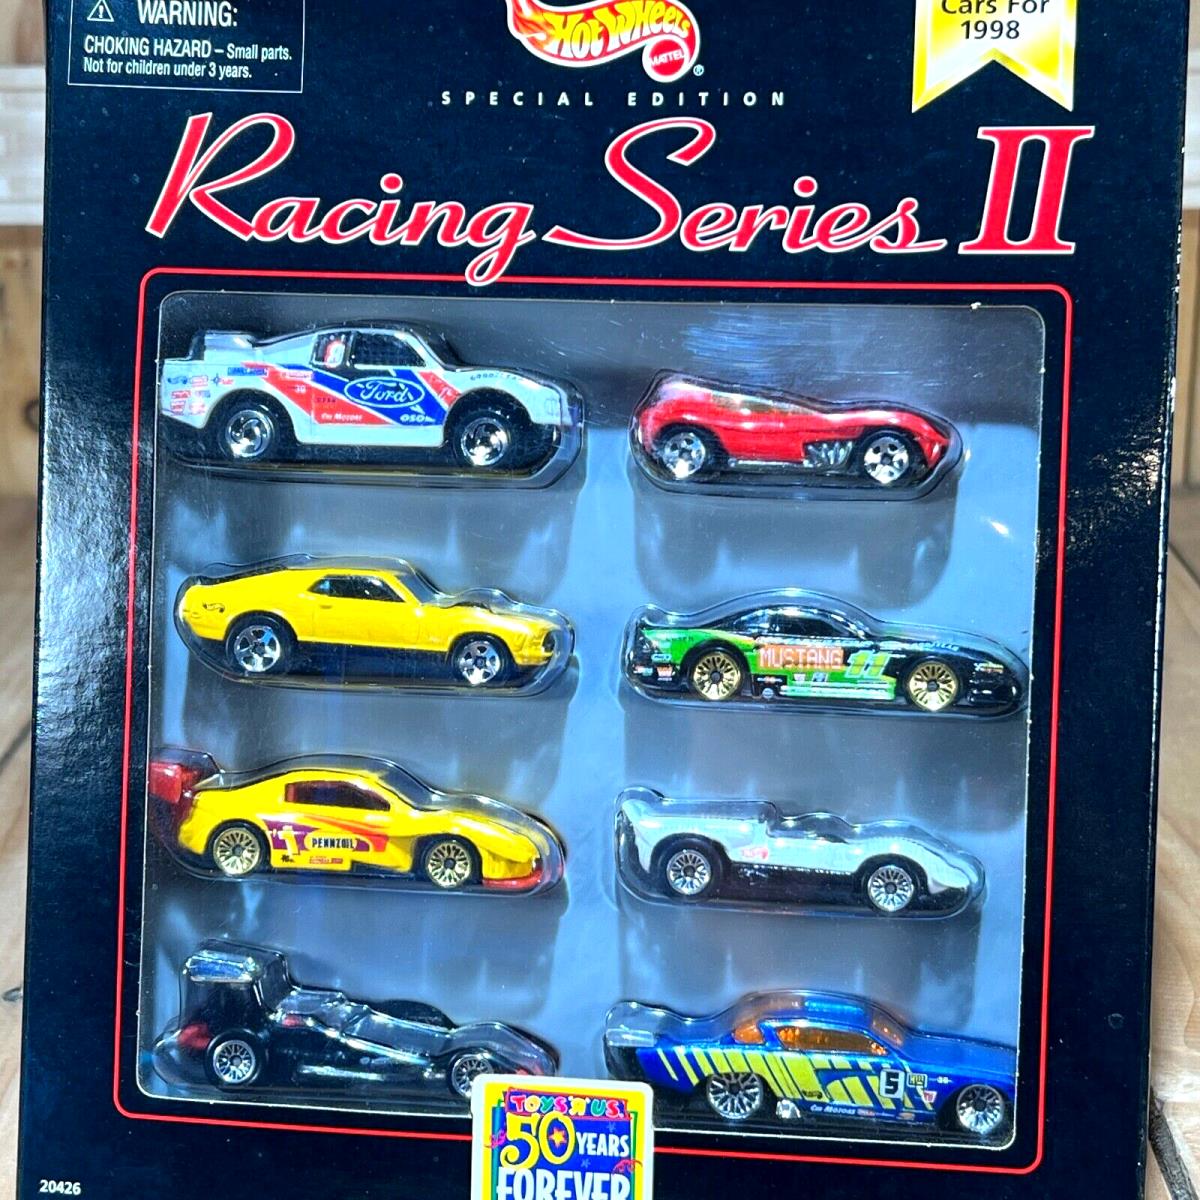 Vintage 1998 Hot Wheels Special Edition Racing Series II Toys R Us- 1:64 Diecast